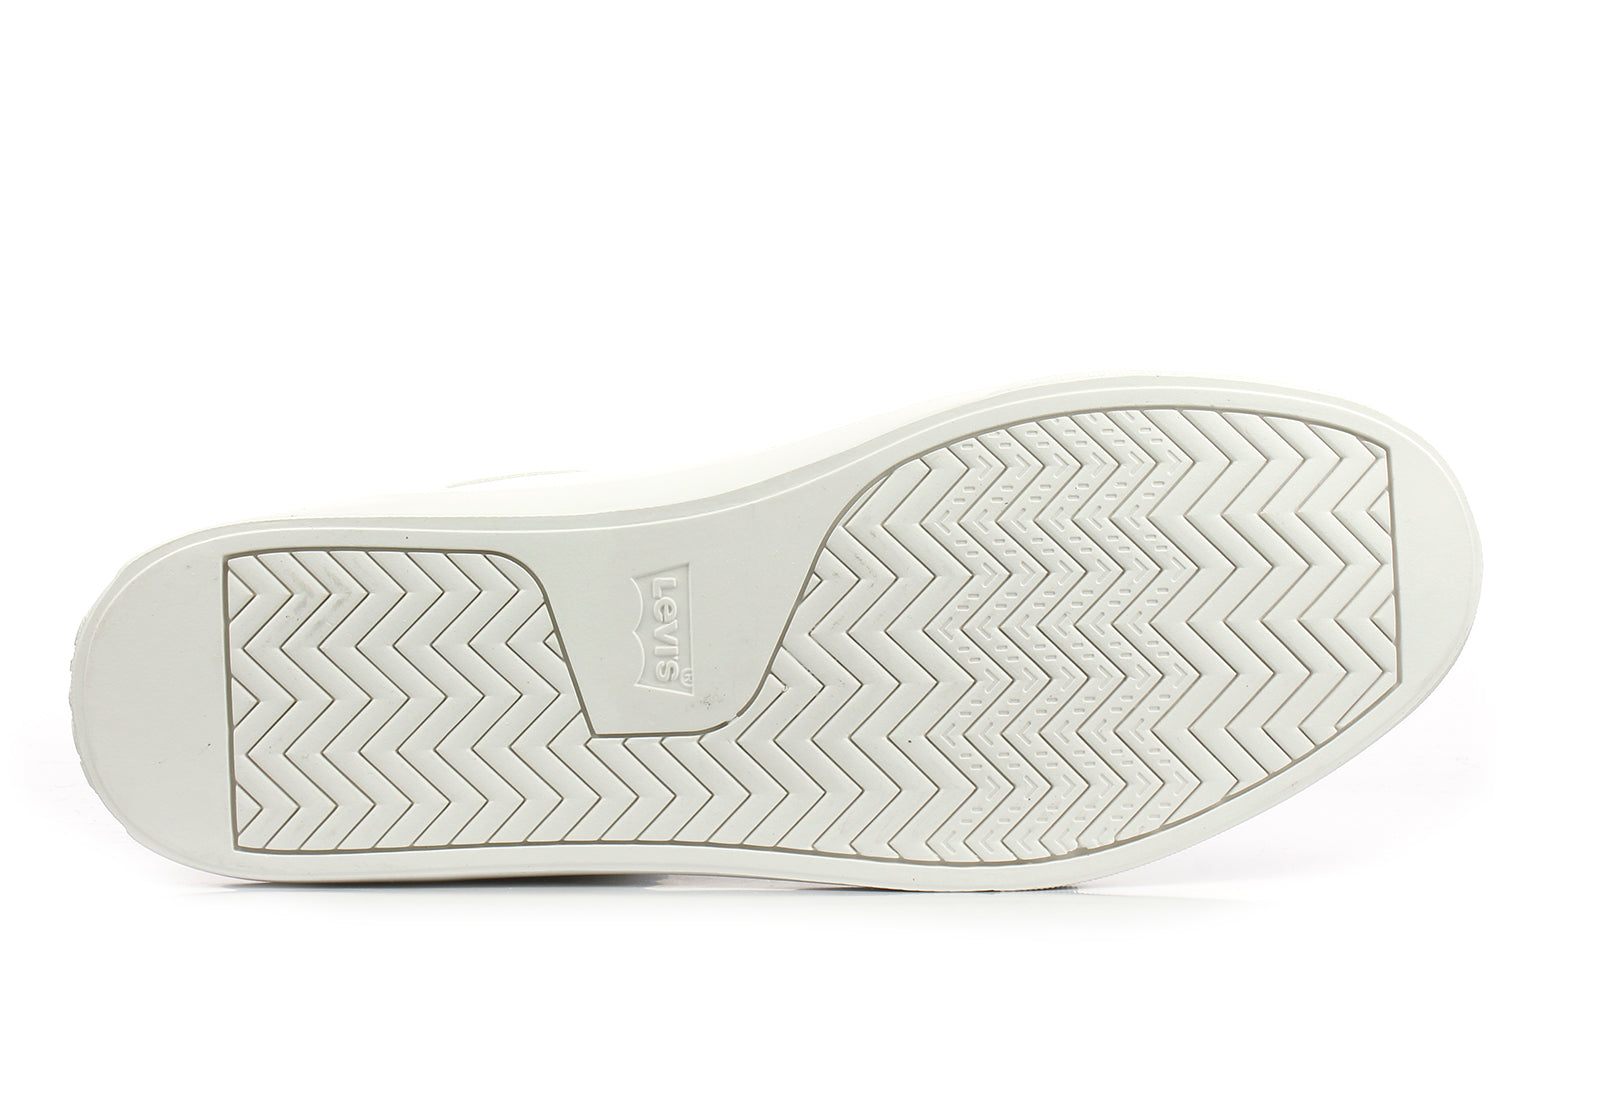 LEVI's FLAT SOLE LACE-UP UNISEX SNEAKERS IN WHITE